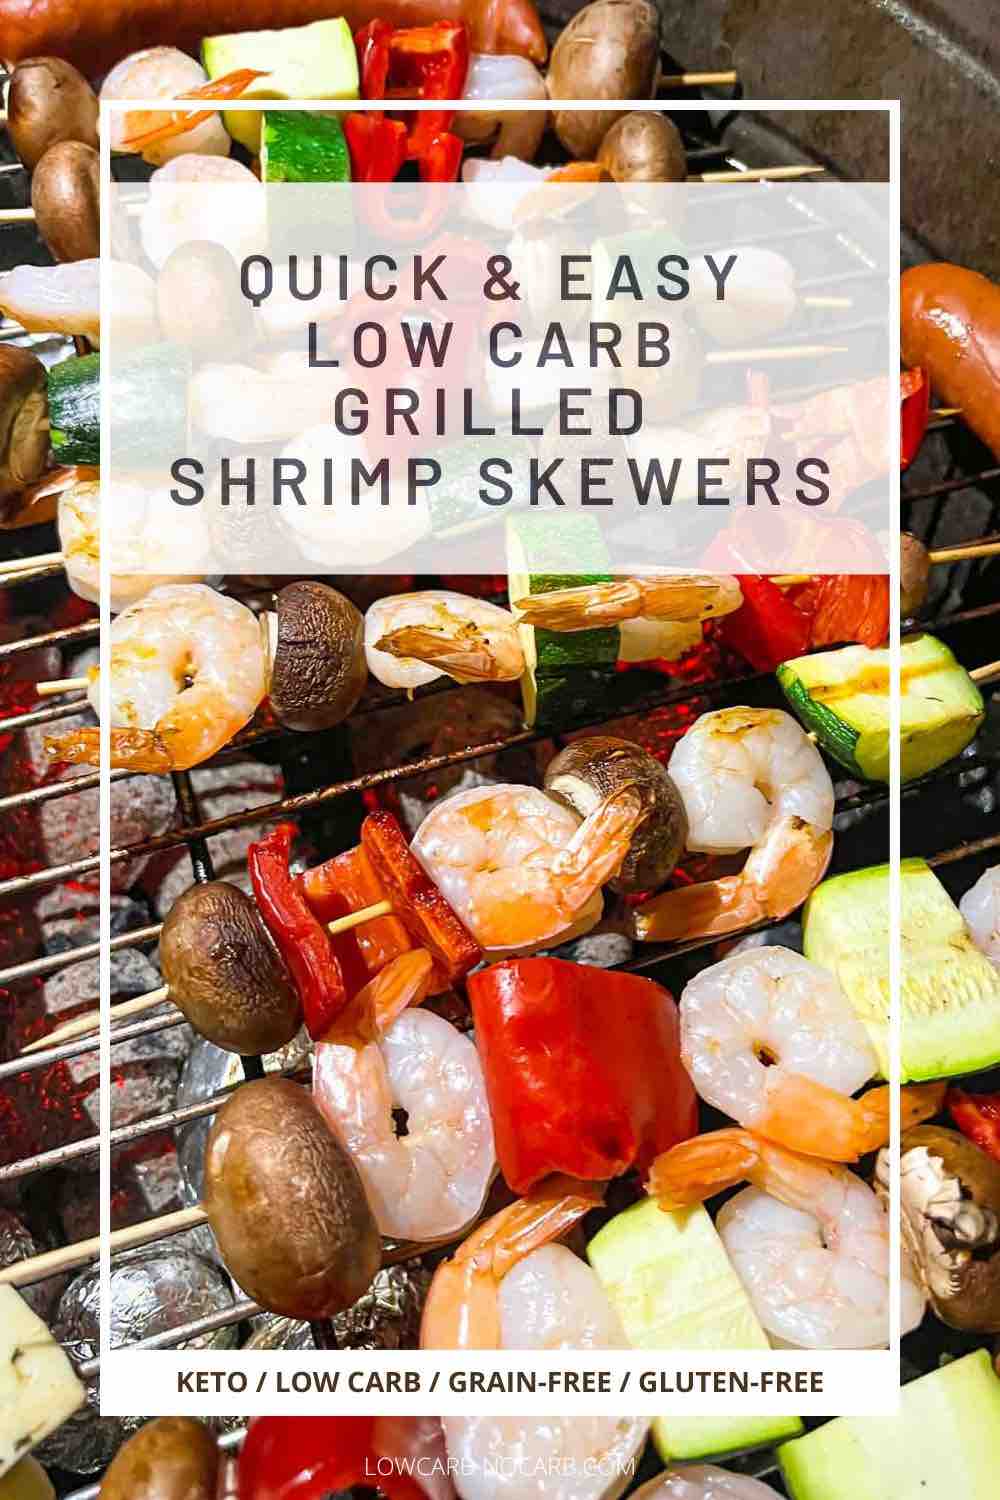 Quick & easy low carb grilled shrimp skewers.